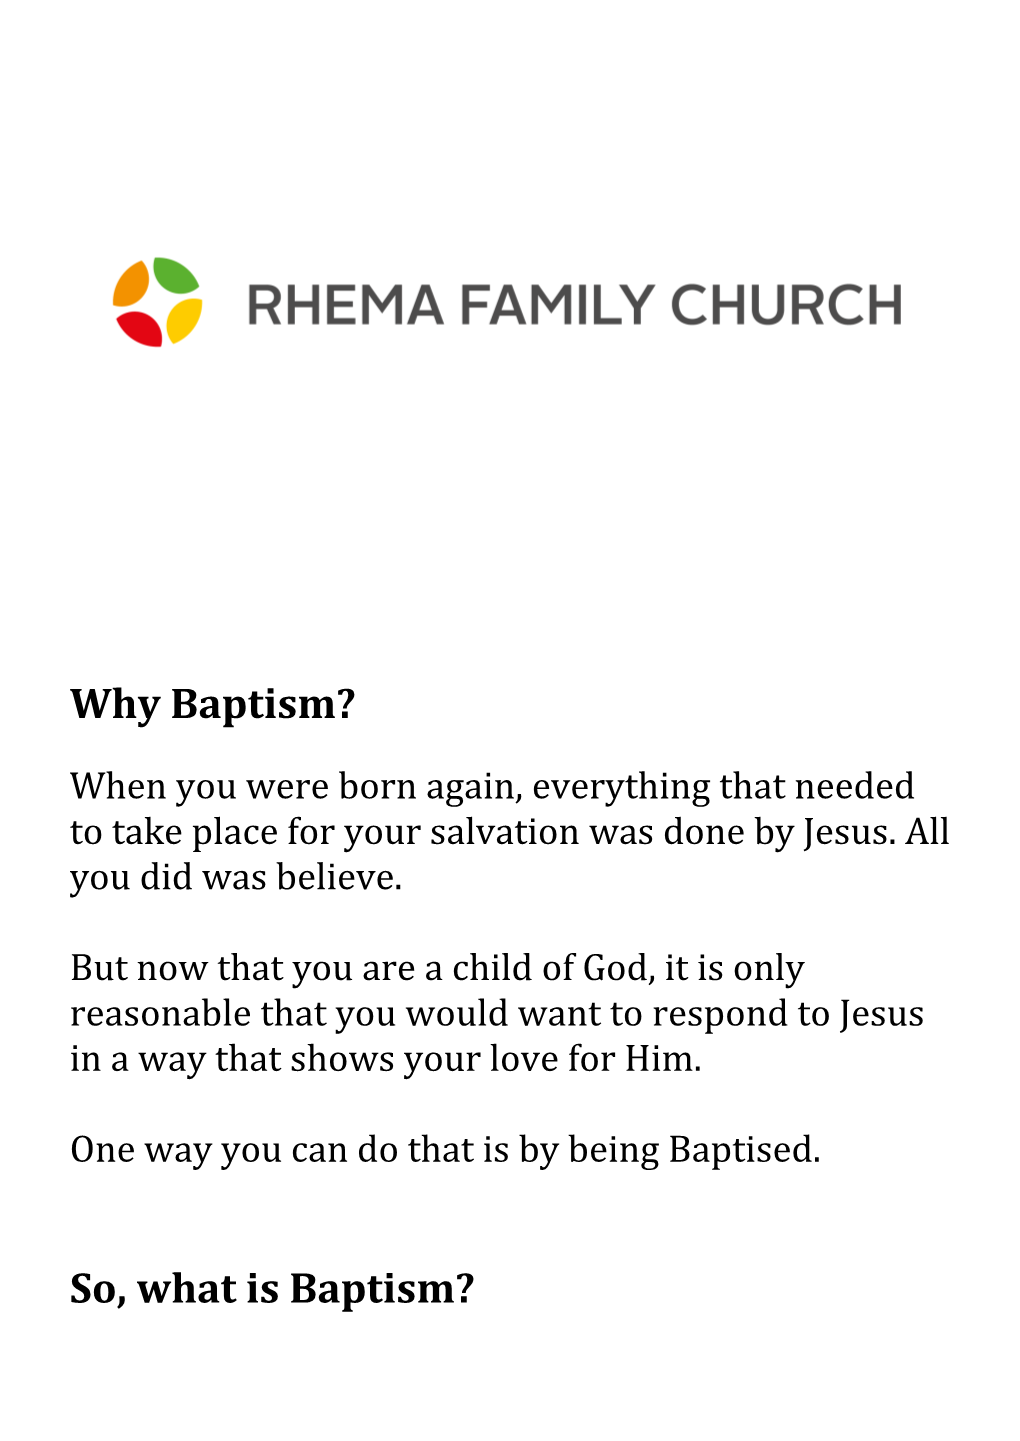 One Way You Can Do That Is by Being Baptised